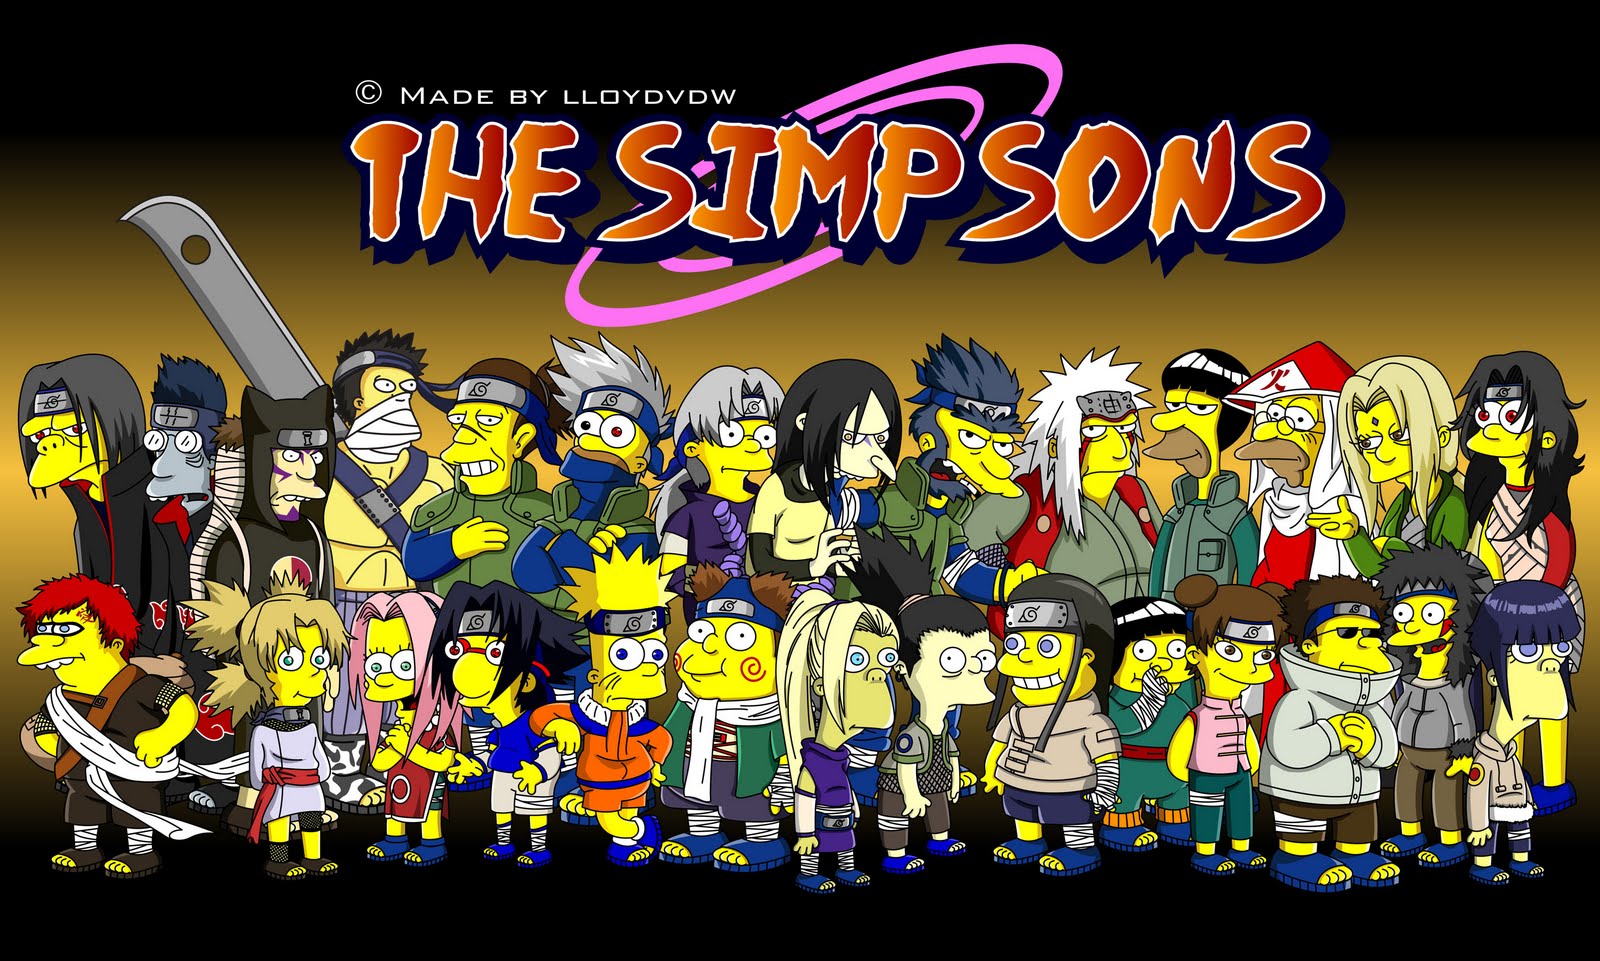 Naruto as The Simpsons